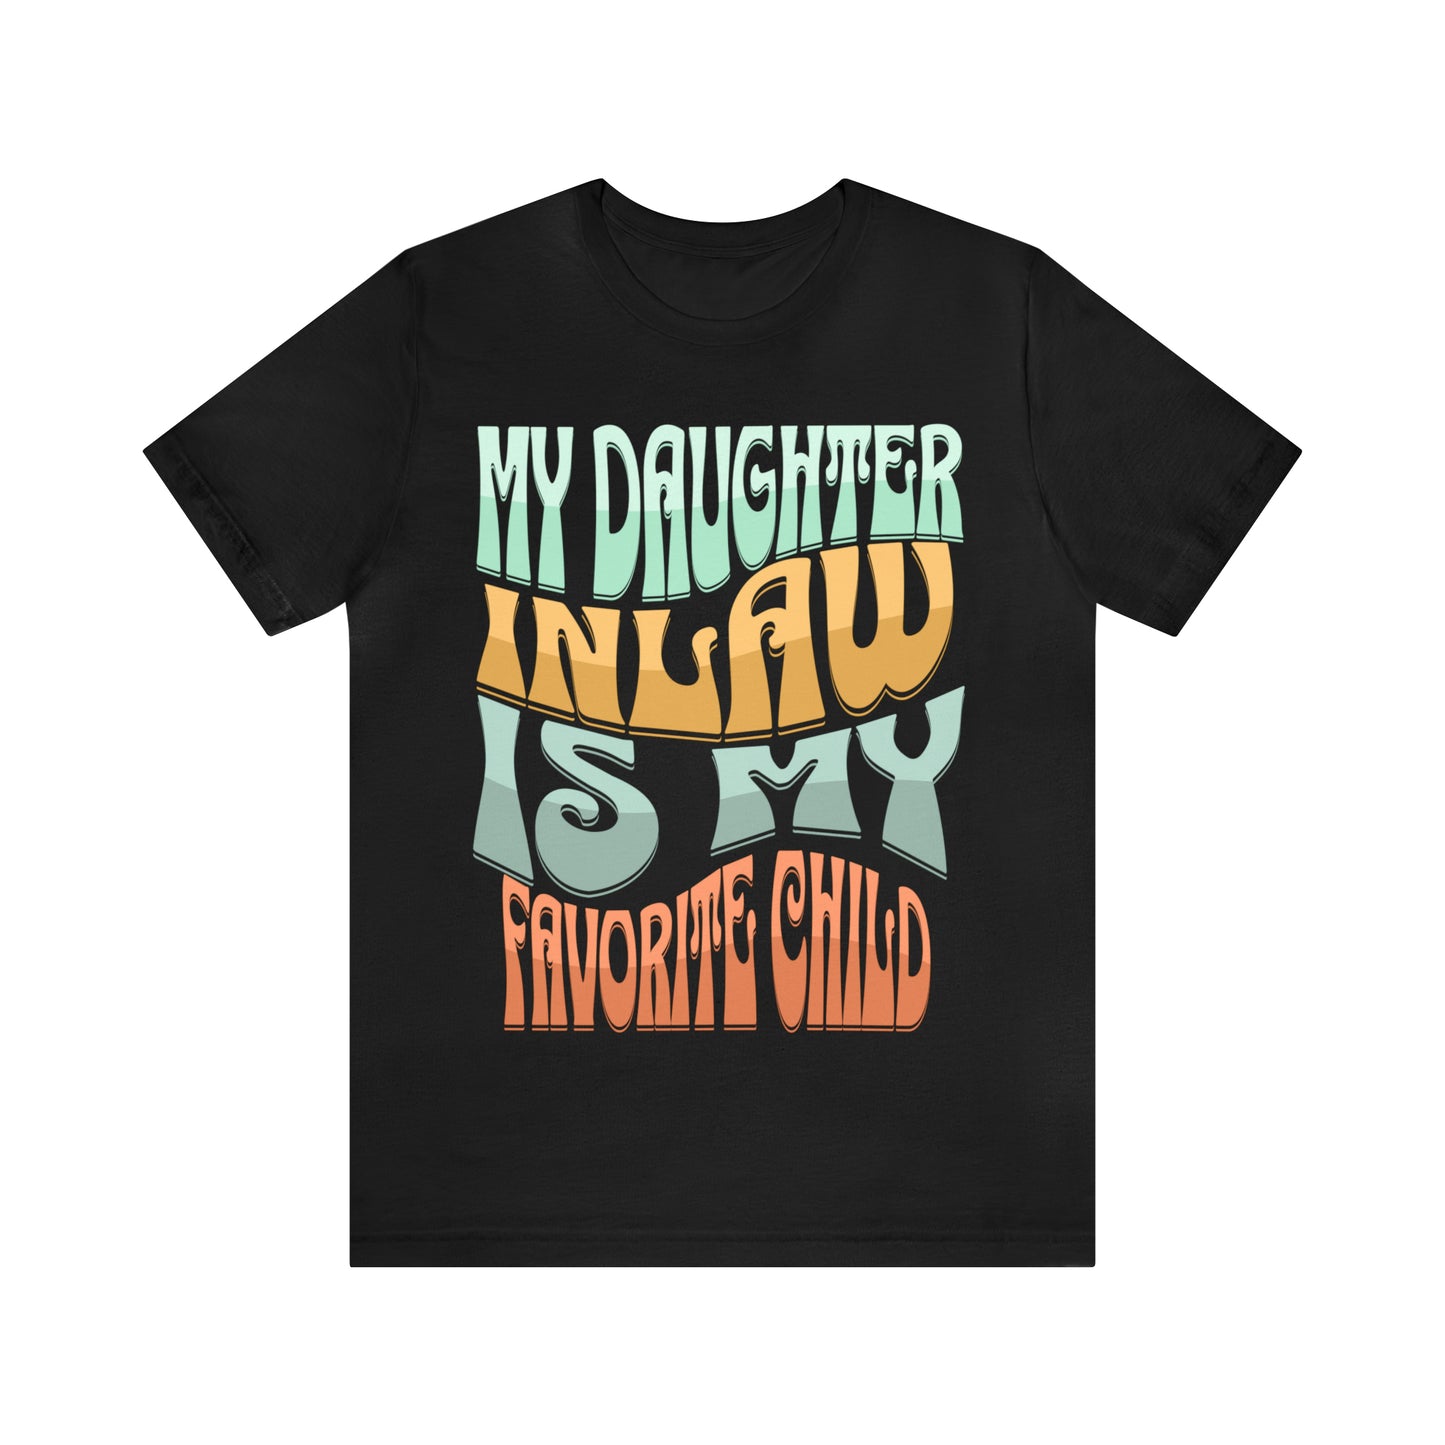 "Unisex 'My Daughter-In-Law Is My Favorite Child' Jersey Tee | Perfect for Parents-in-Law"